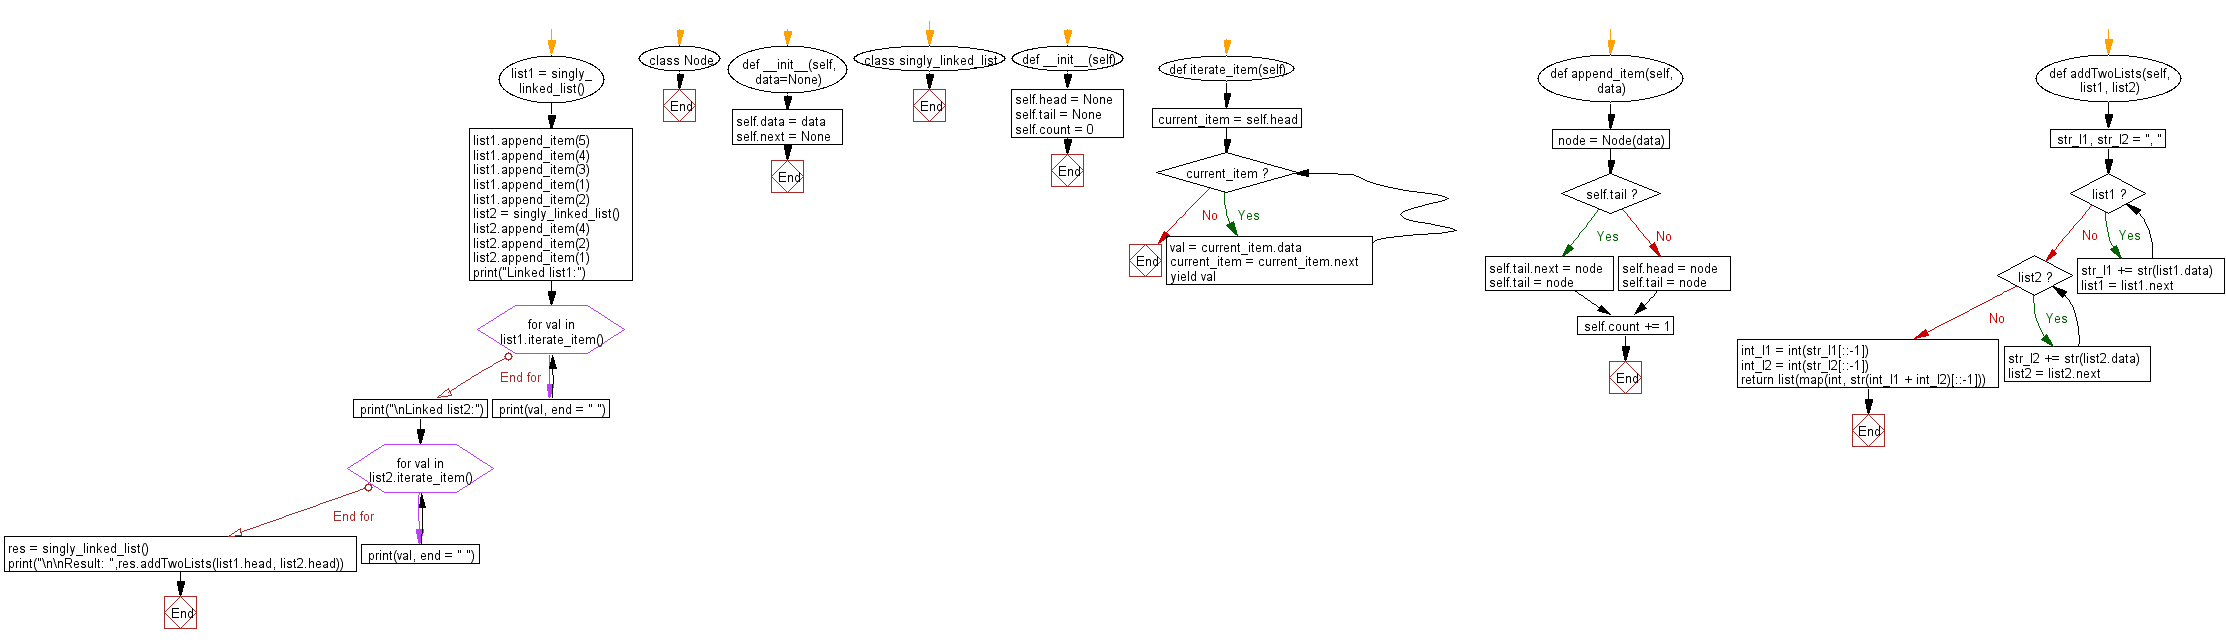 Python Flowchart: Add Two Numbers.